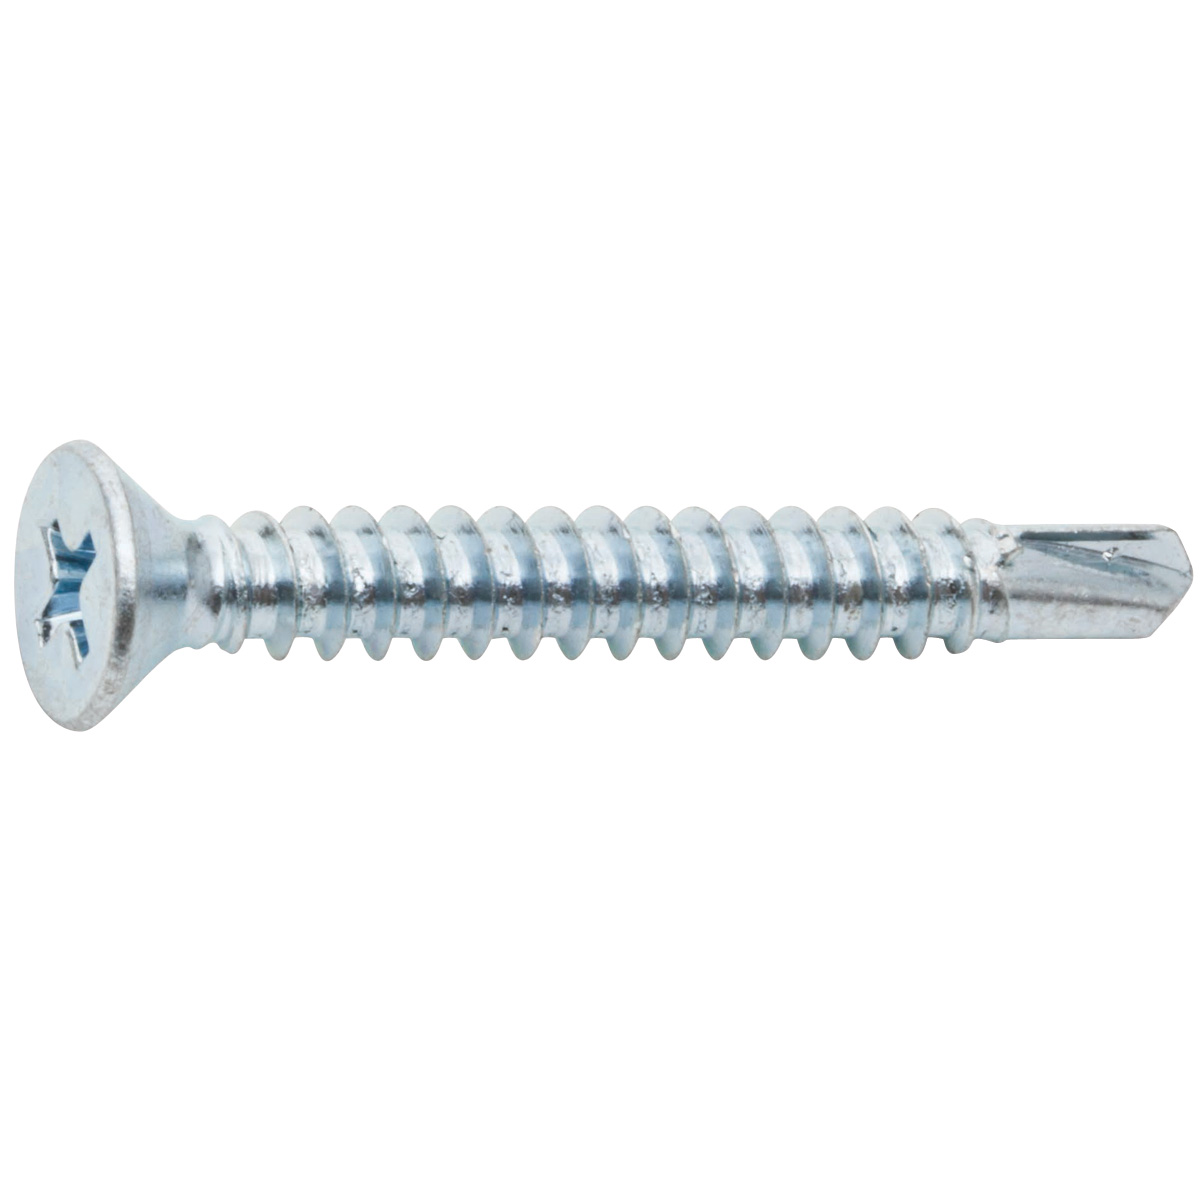 410 Stainless Steel Self-Drilling Screw Plain Finish Pack of 1000 #12-14 Thread Size #3 Drill Point Pan Head 2 Length Phillips Drive 2 Length Small Parts 1232KPP410 Pack of 1000 